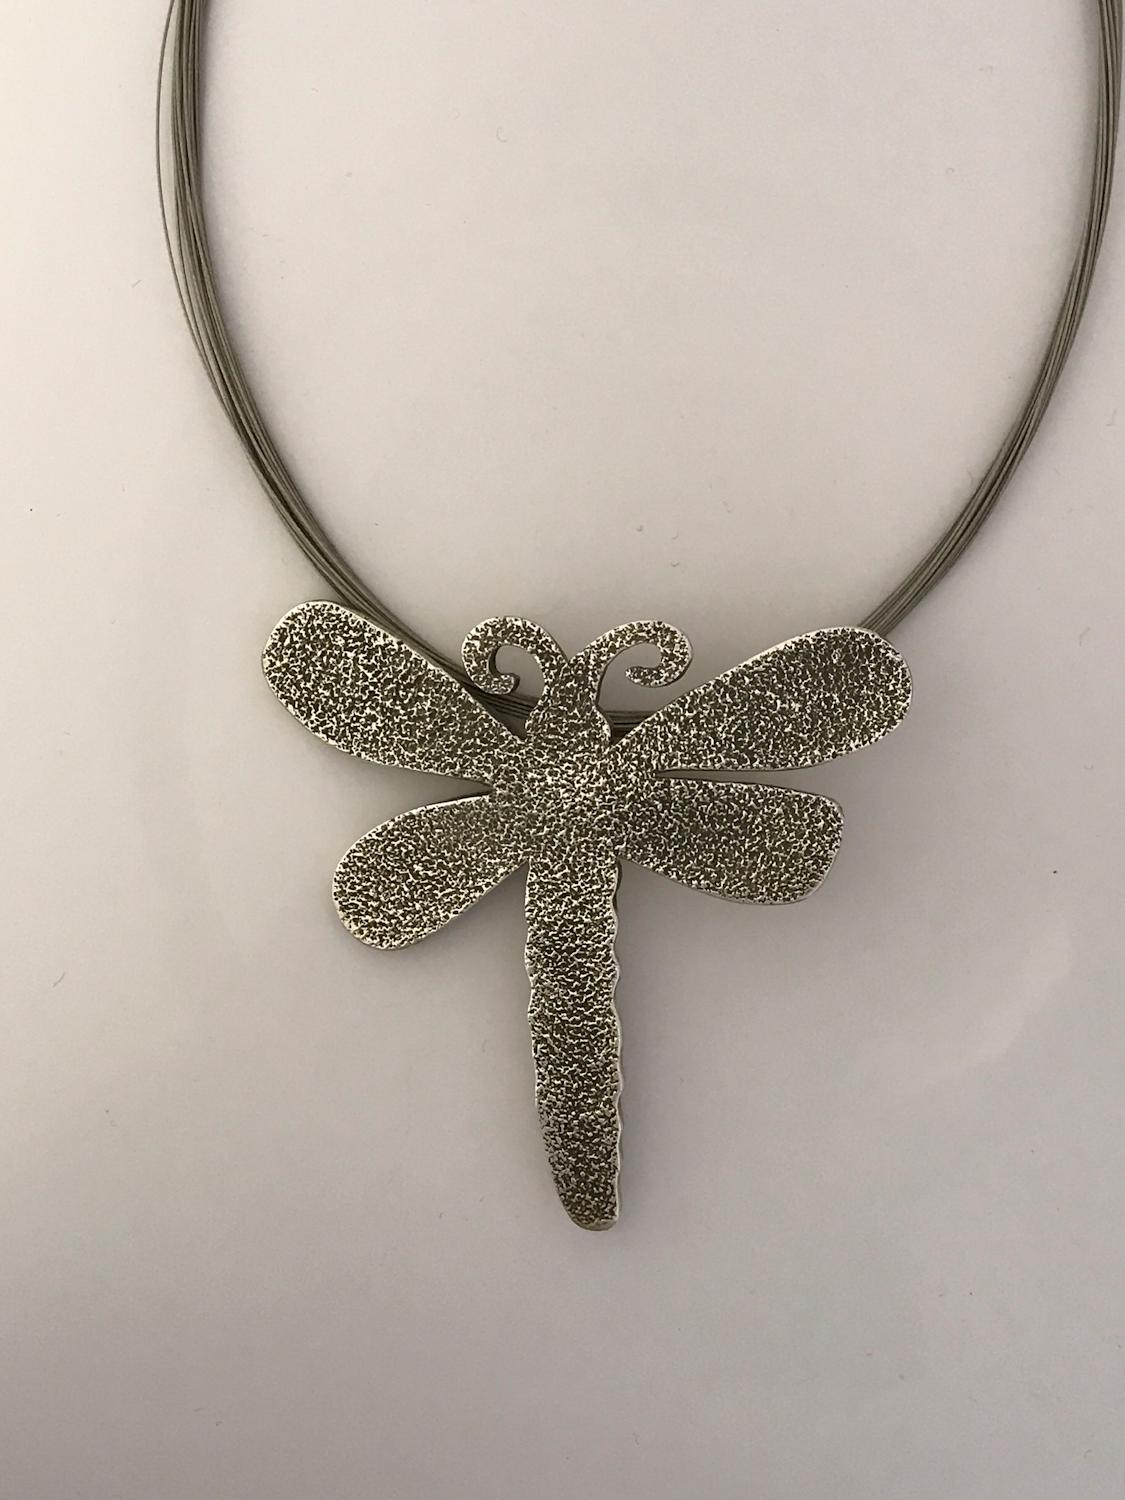 Embrace Water, Dragonfly pendant enhancer, Melanie Yazzie designs, silver Navajo

Pendant/enhancer cast sterling silver. Gently slide the enhancer over beads or a cord of your own. Beads and cords shown in the images are for sale